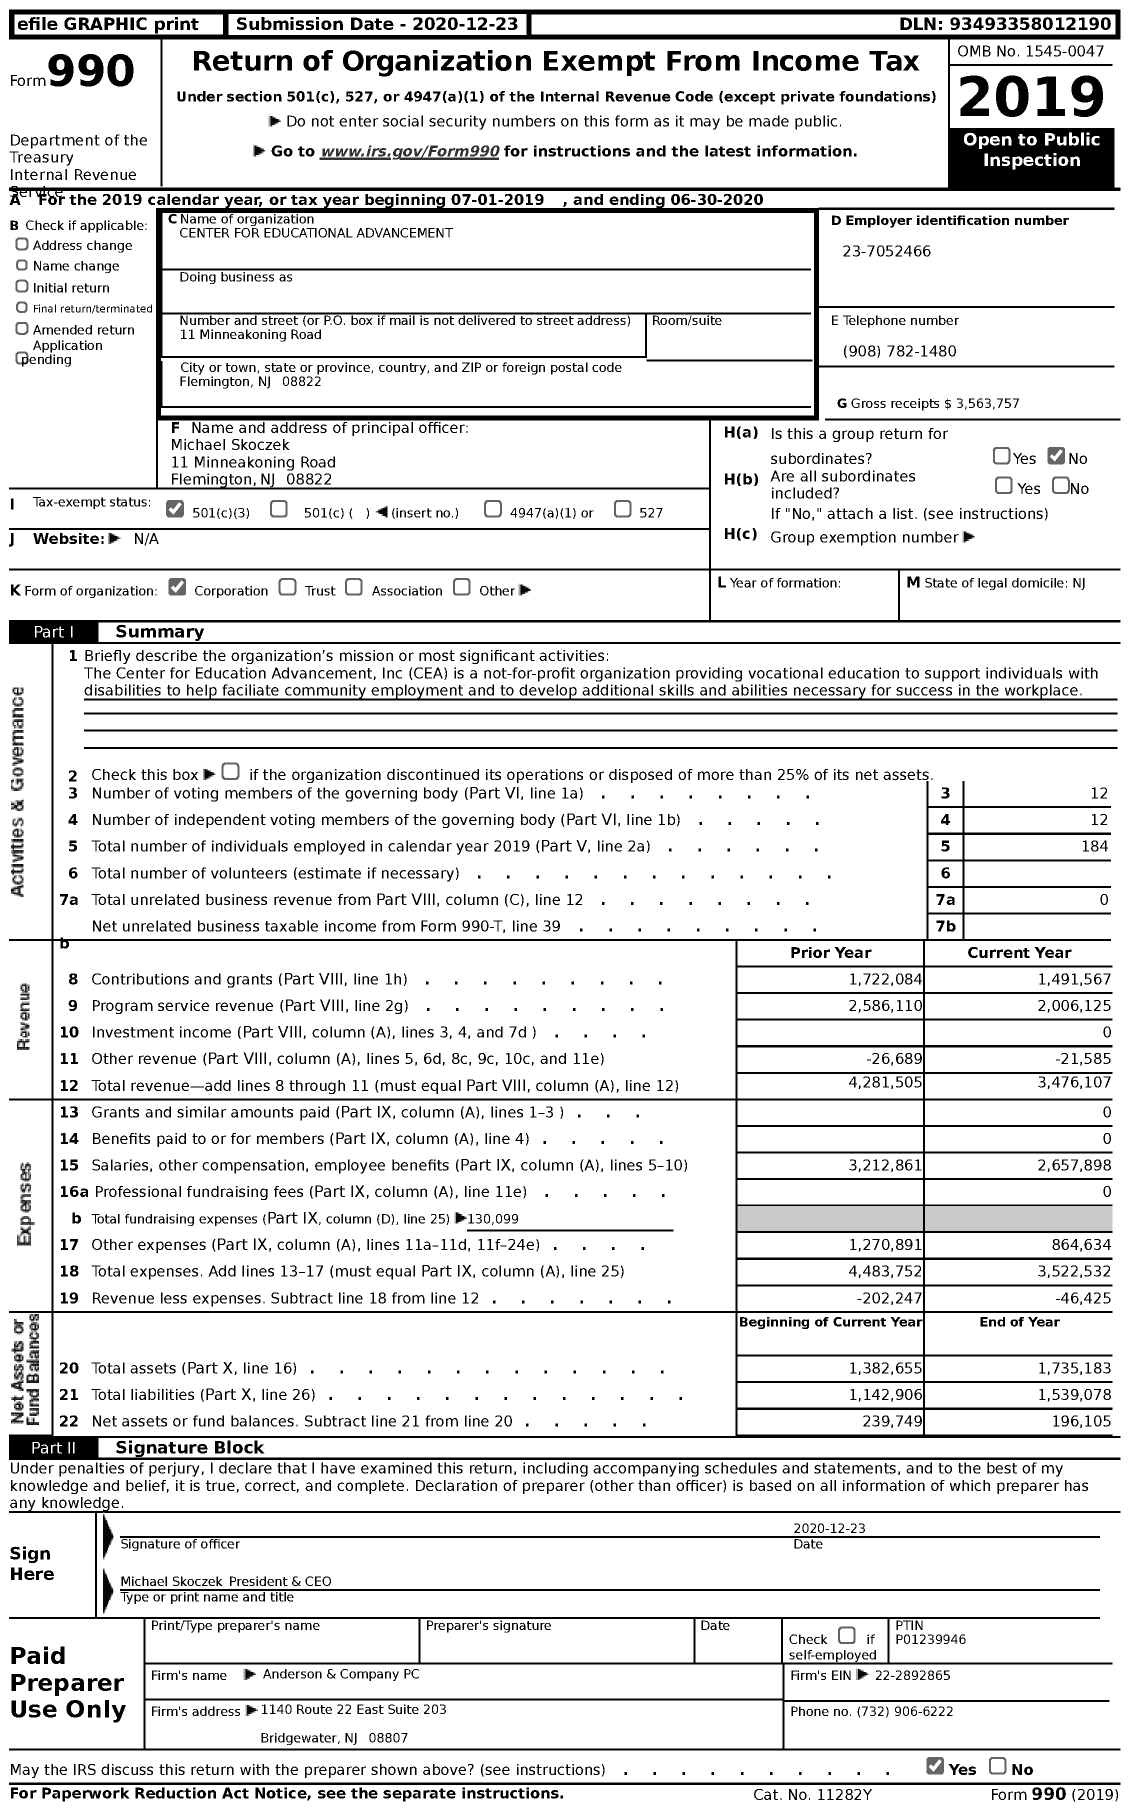 Image of first page of 2019 Form 990 for Center for Educational Advancement (CEA)